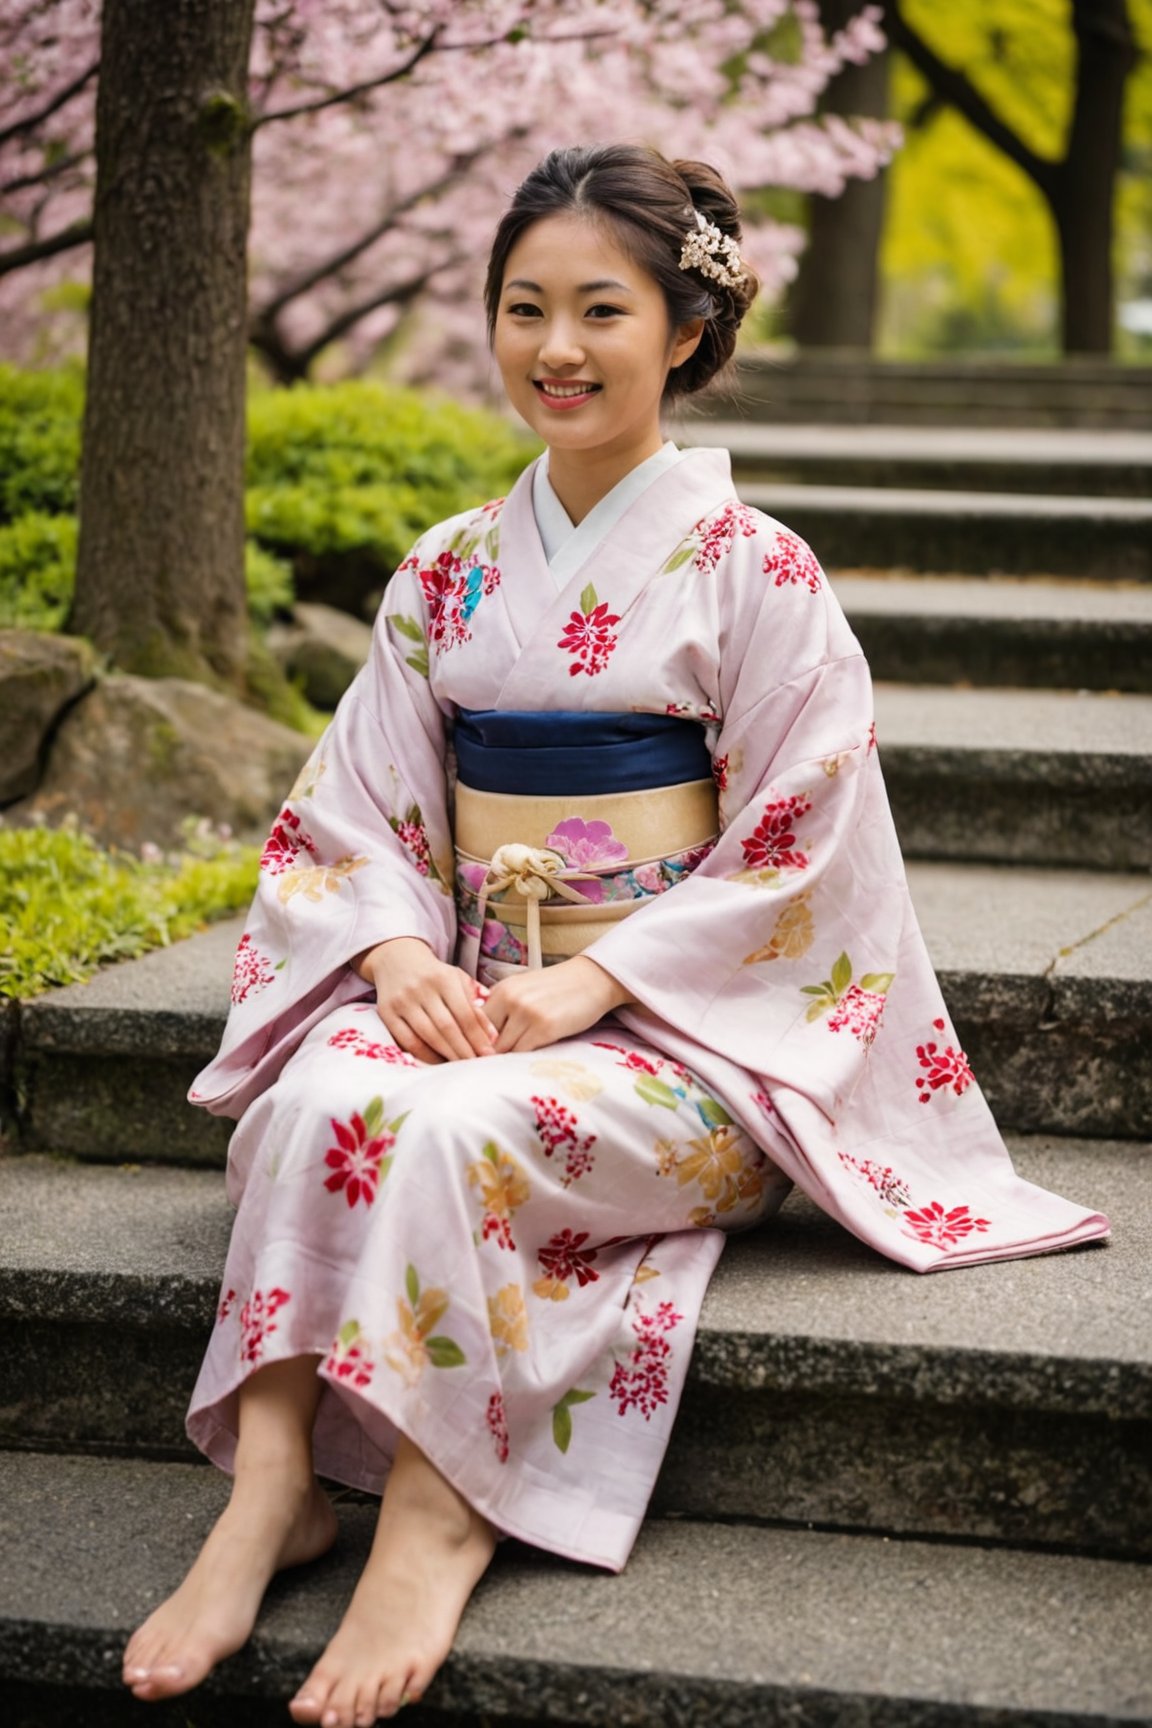 a joung Japanese gaisha sitting on stairs in a park, around her are cheery blossoms and flowers, wearing kimono